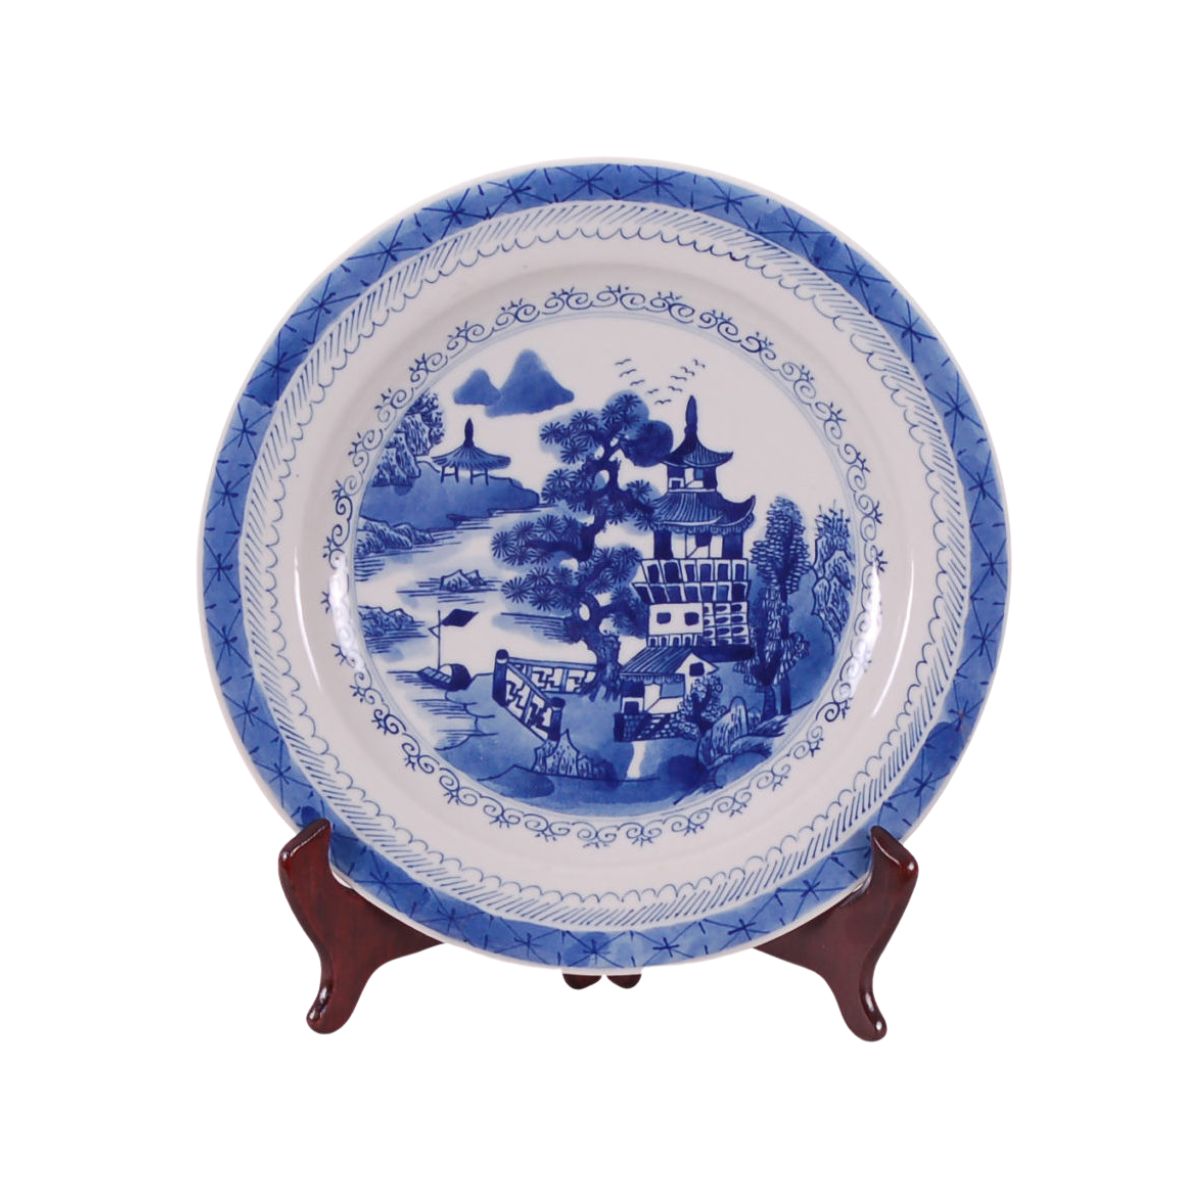 Blue and White Chinese Porcelain Plate, Canton Design